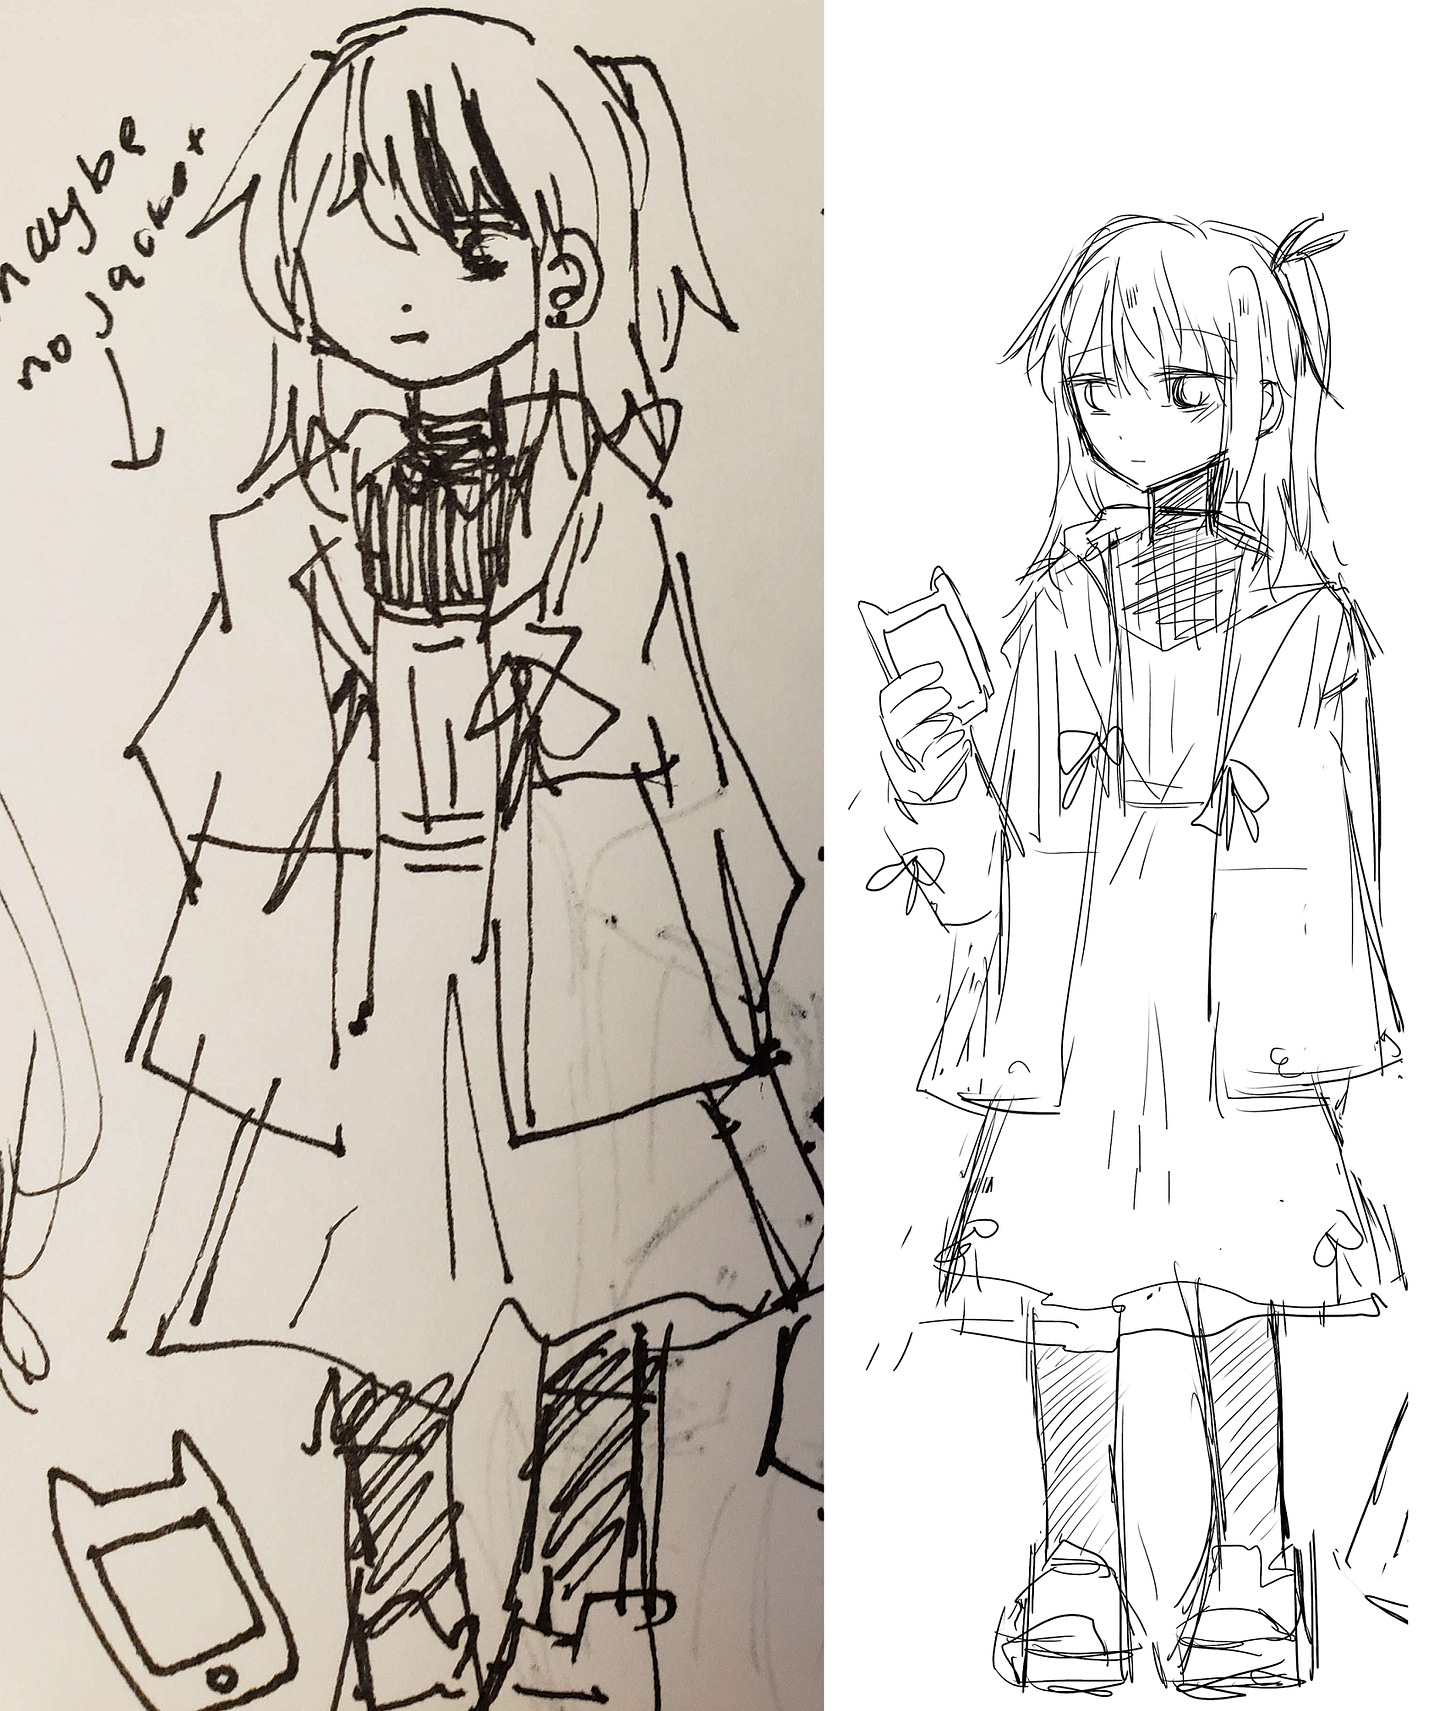 sketches of Yanxu's character design, most elements the same as the final